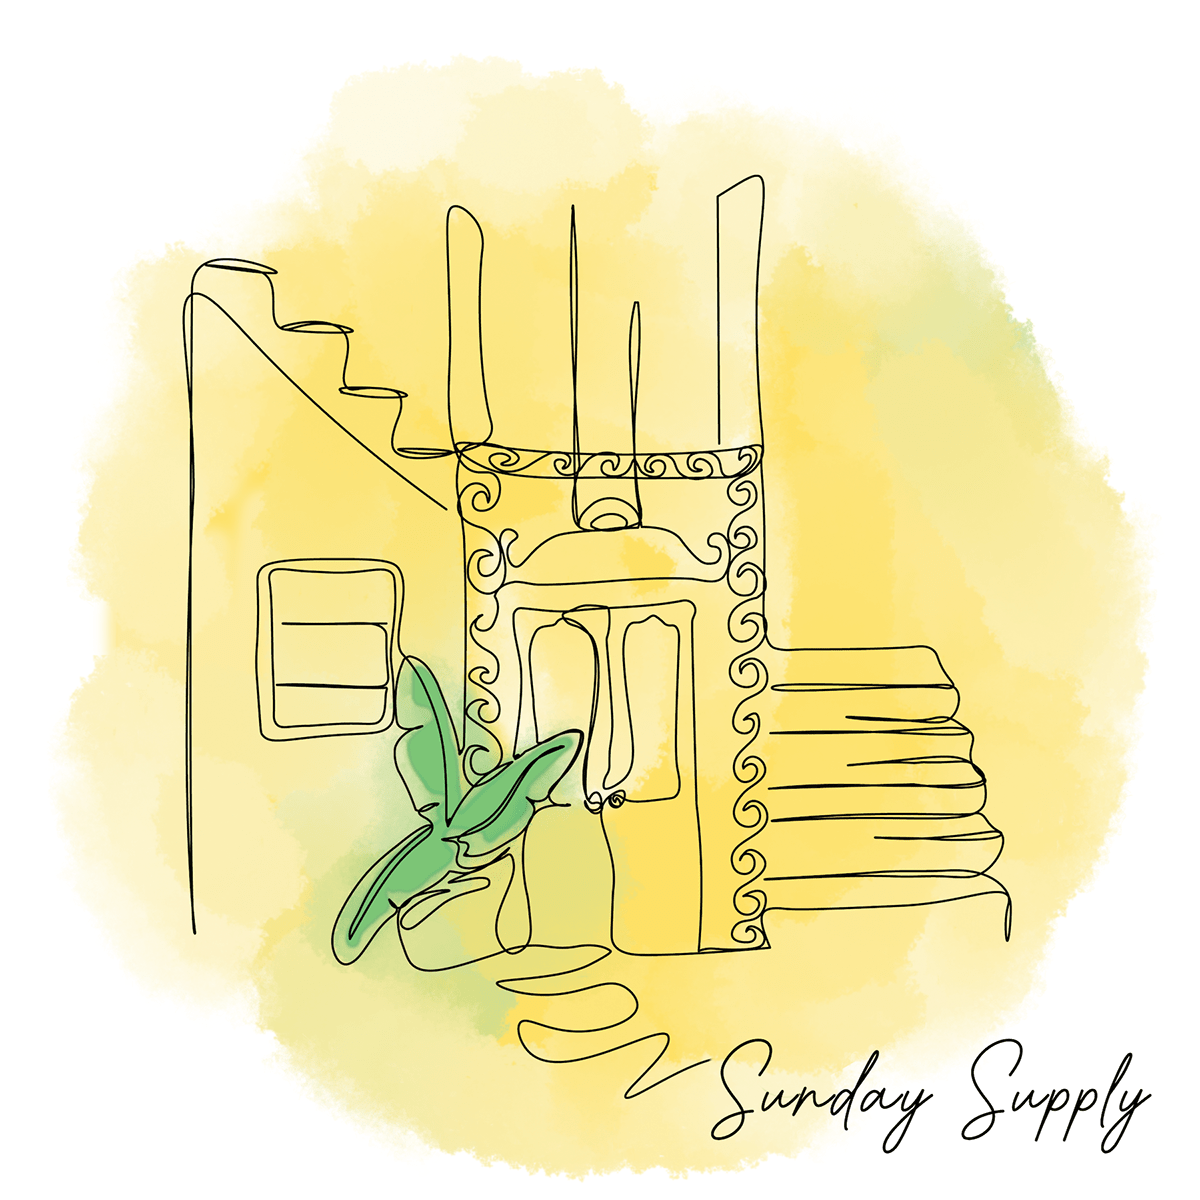 Old fashioned elevator drawn with a single line on a yellow and green watercolor background